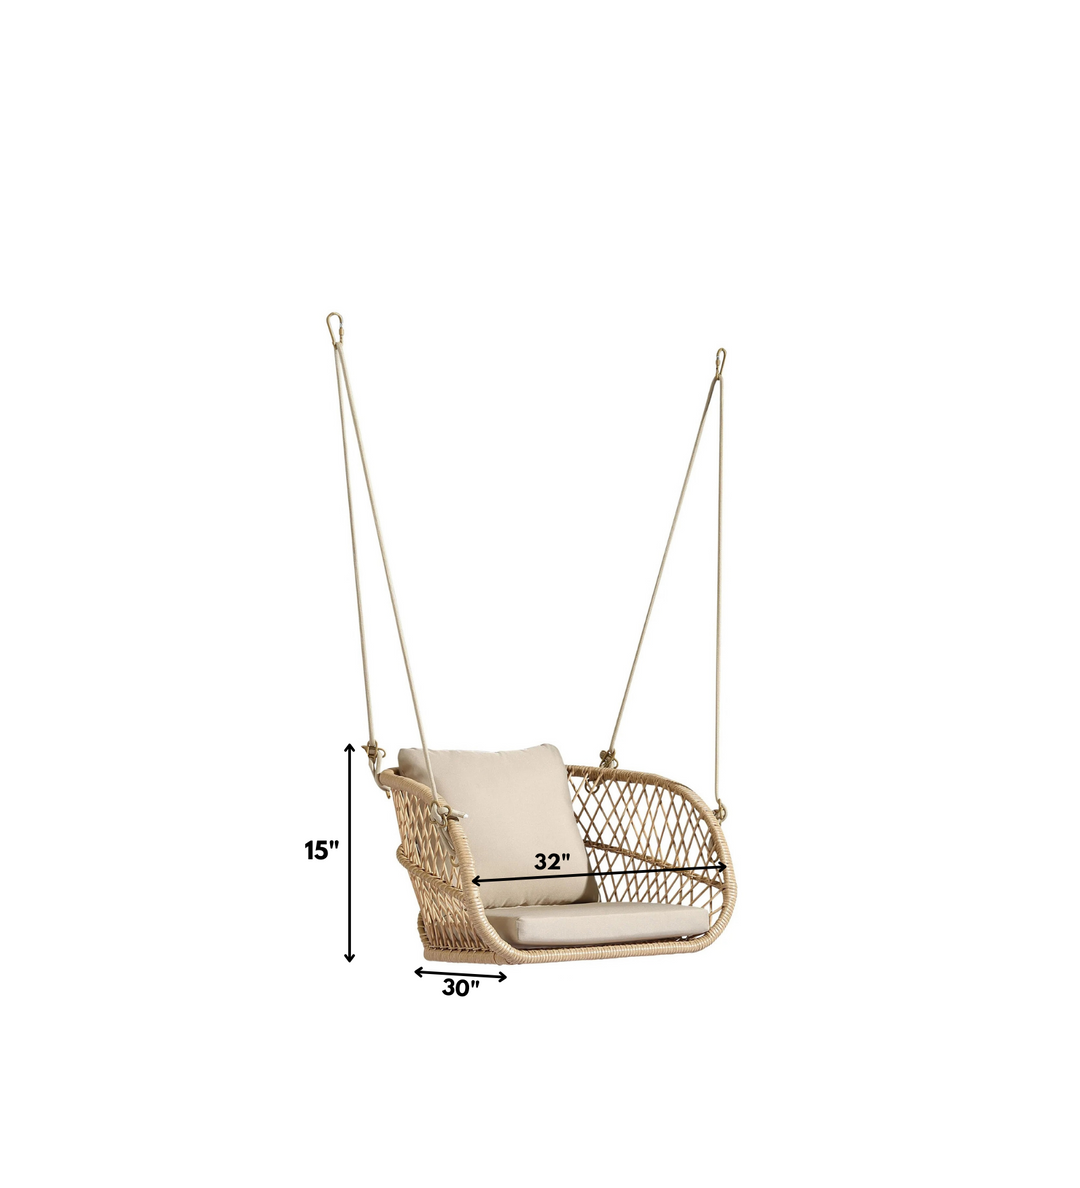 Harley Single Seater Hanging Swing Without Stand For Balcony , Garden Swing (Honey)